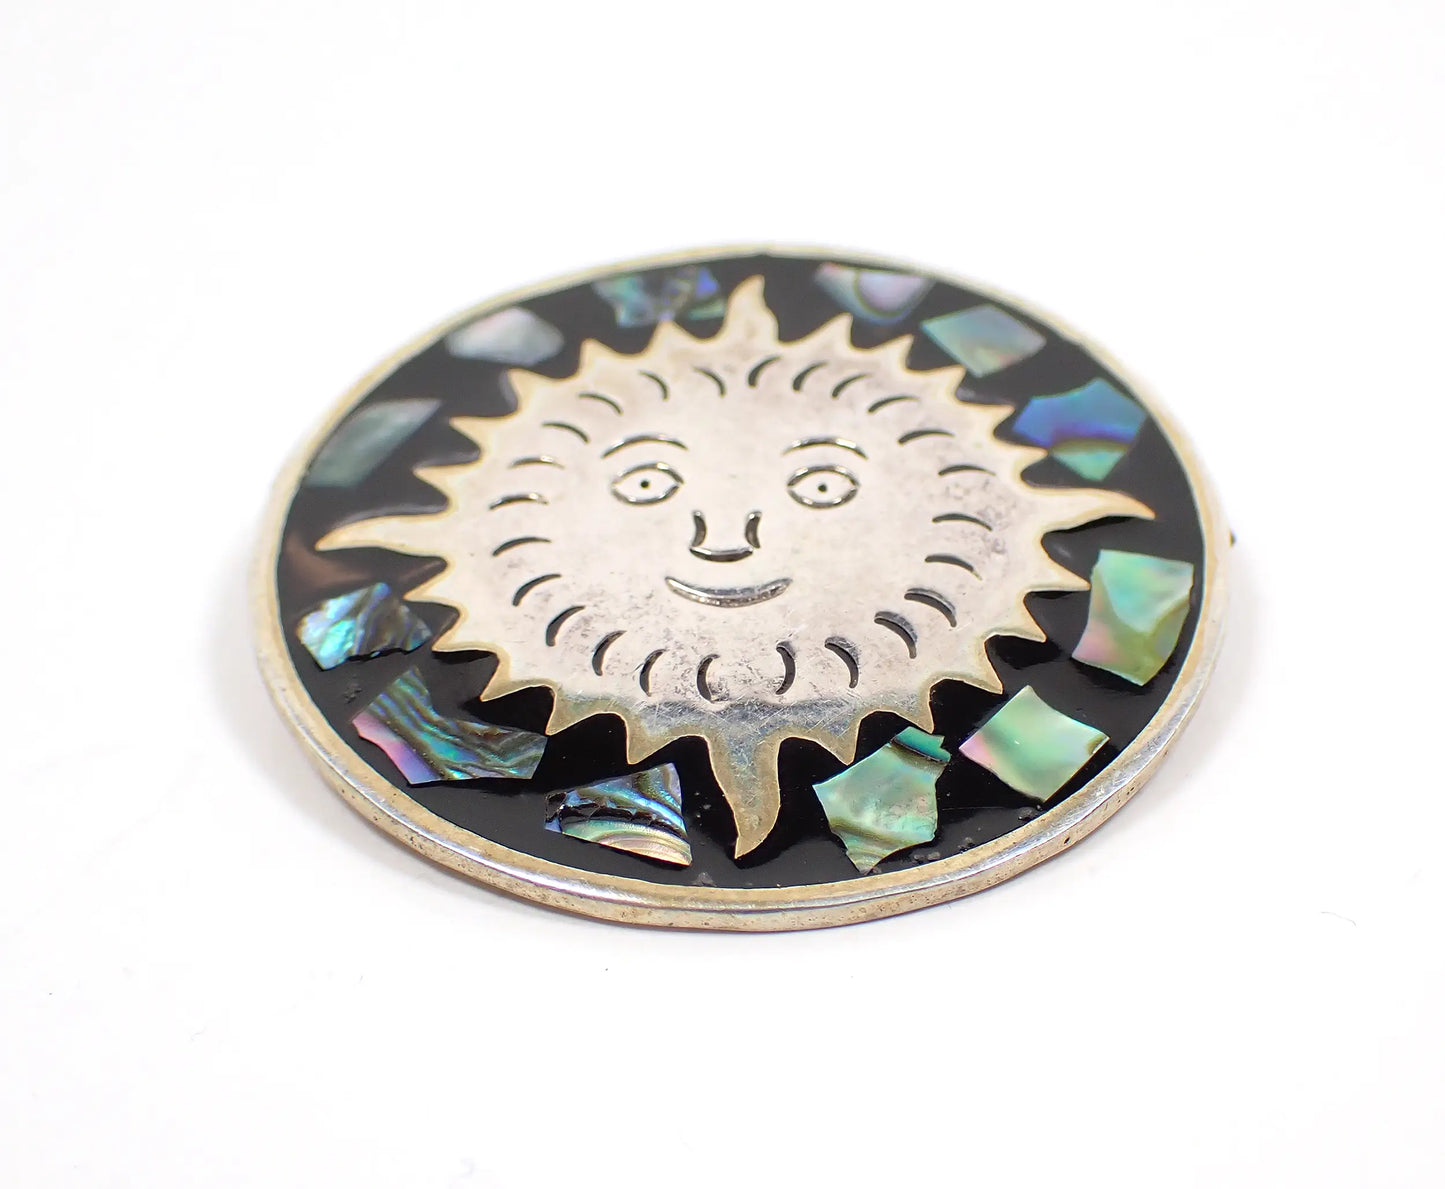 Mexico Alpaca Black Enameled Retro Vintage Sun Brooch Pin Pendant with Inlaid Abalone Shell, Southwestern Jewelry